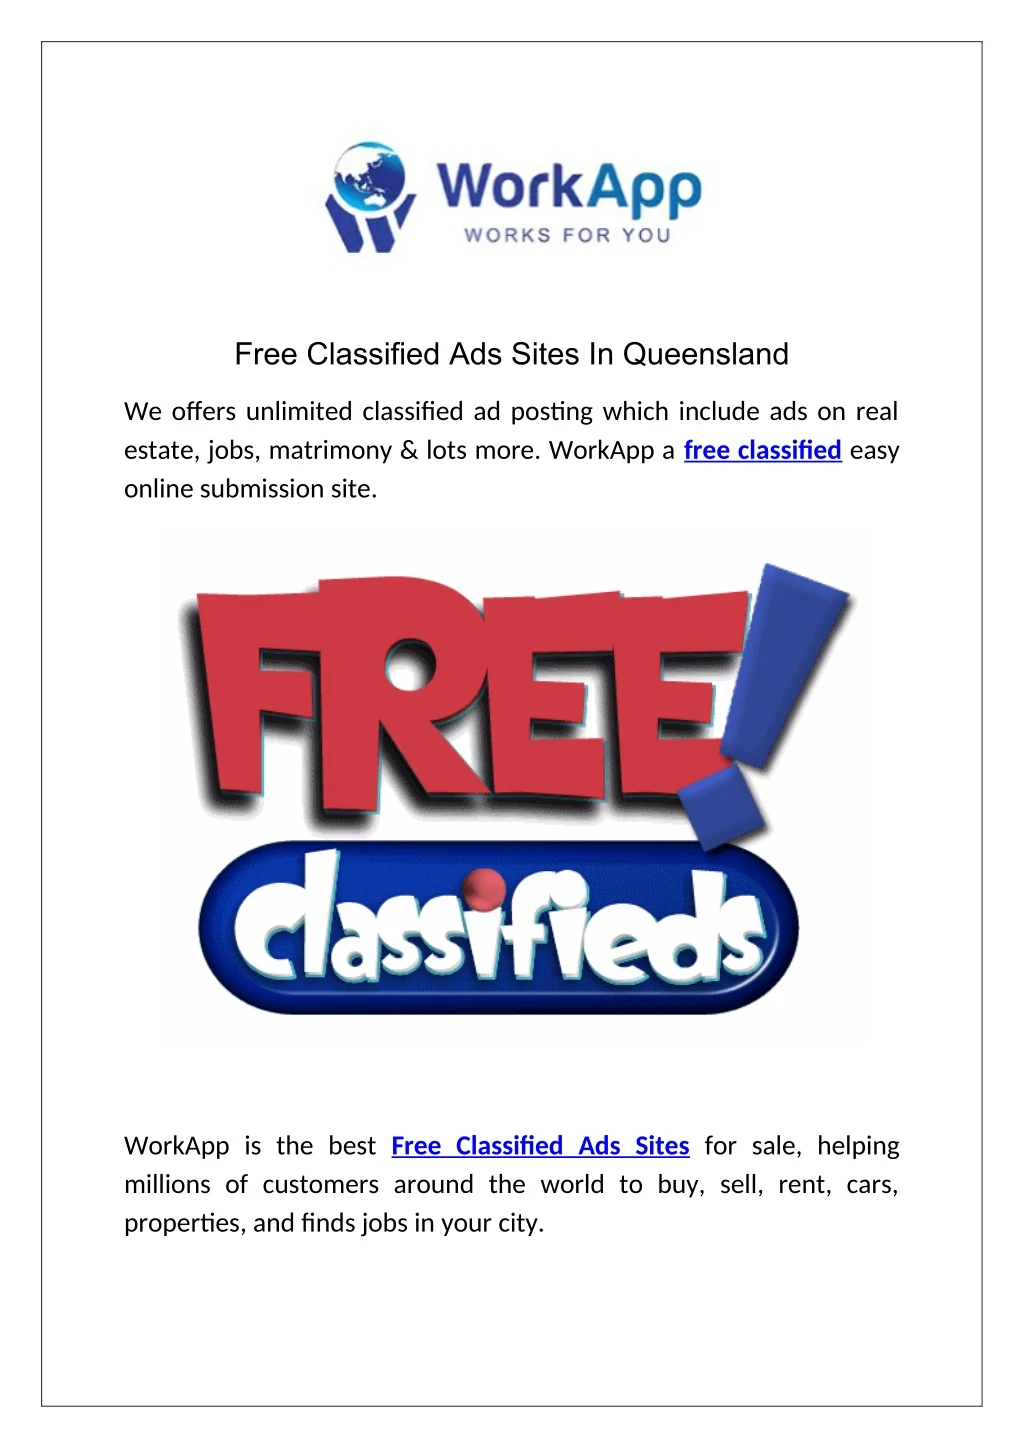 free classified ads sites in queensland